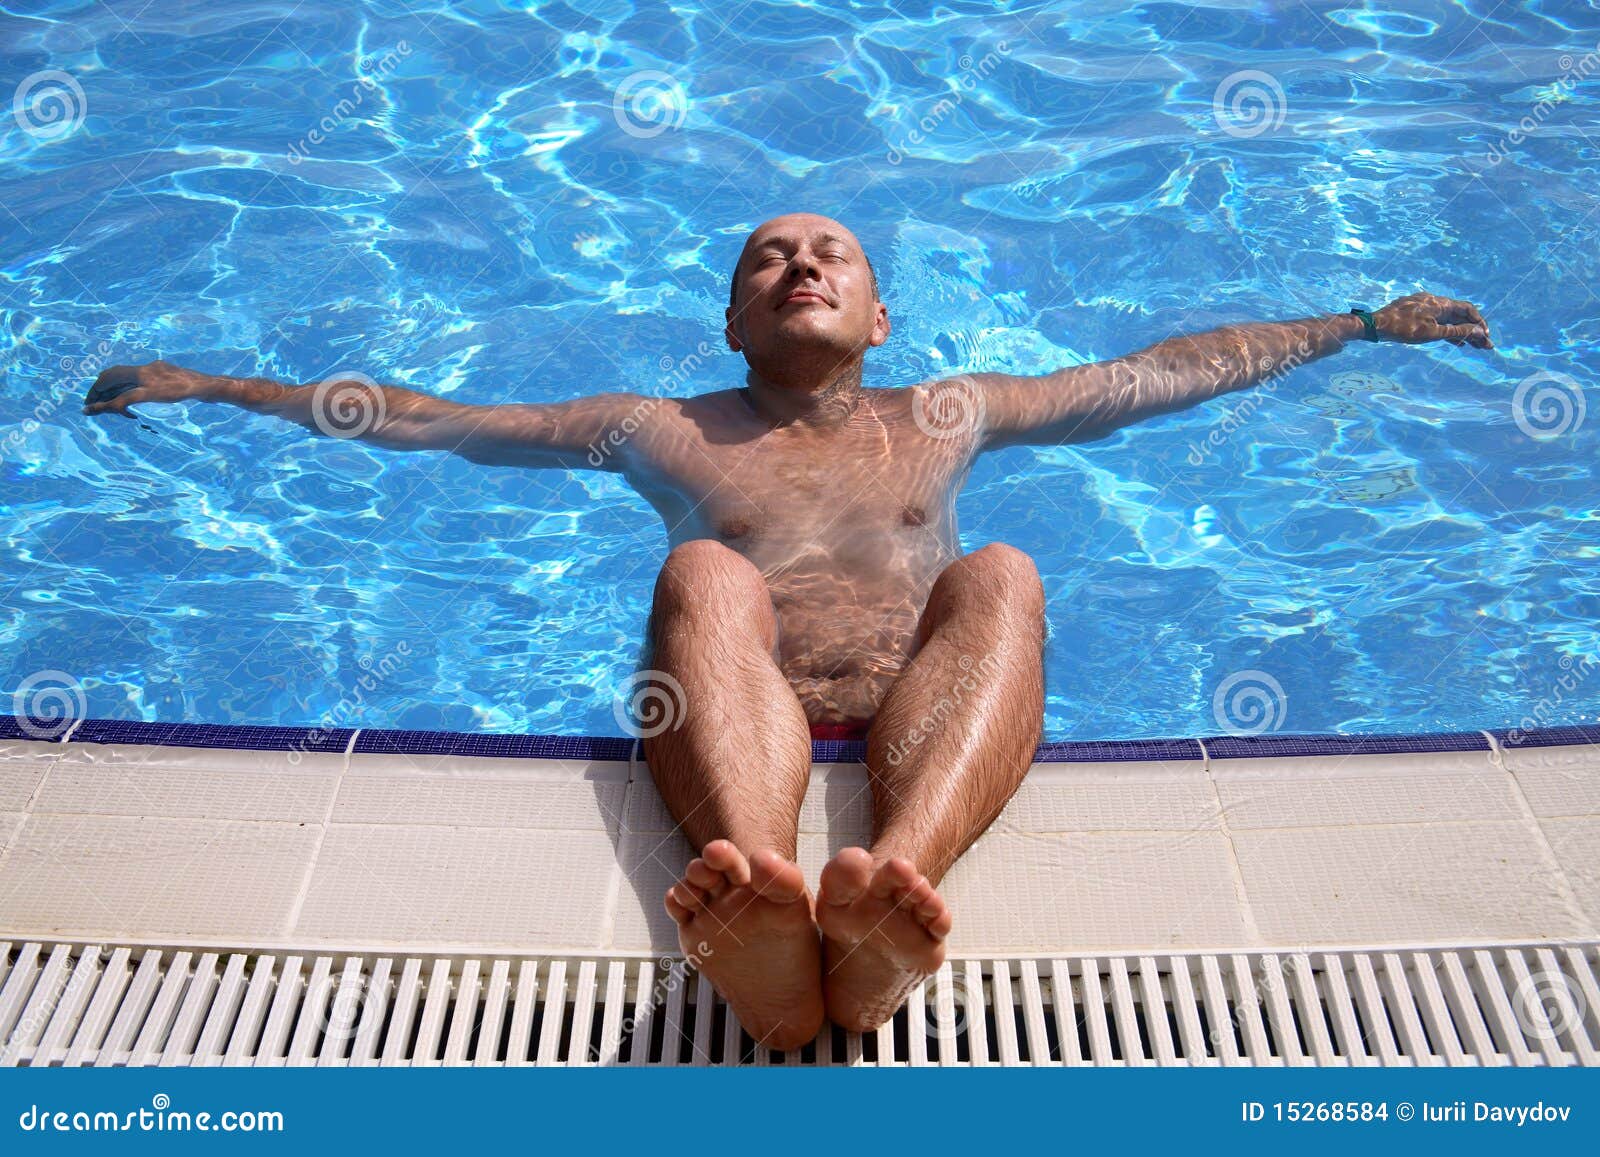 Naked Dude Swimming